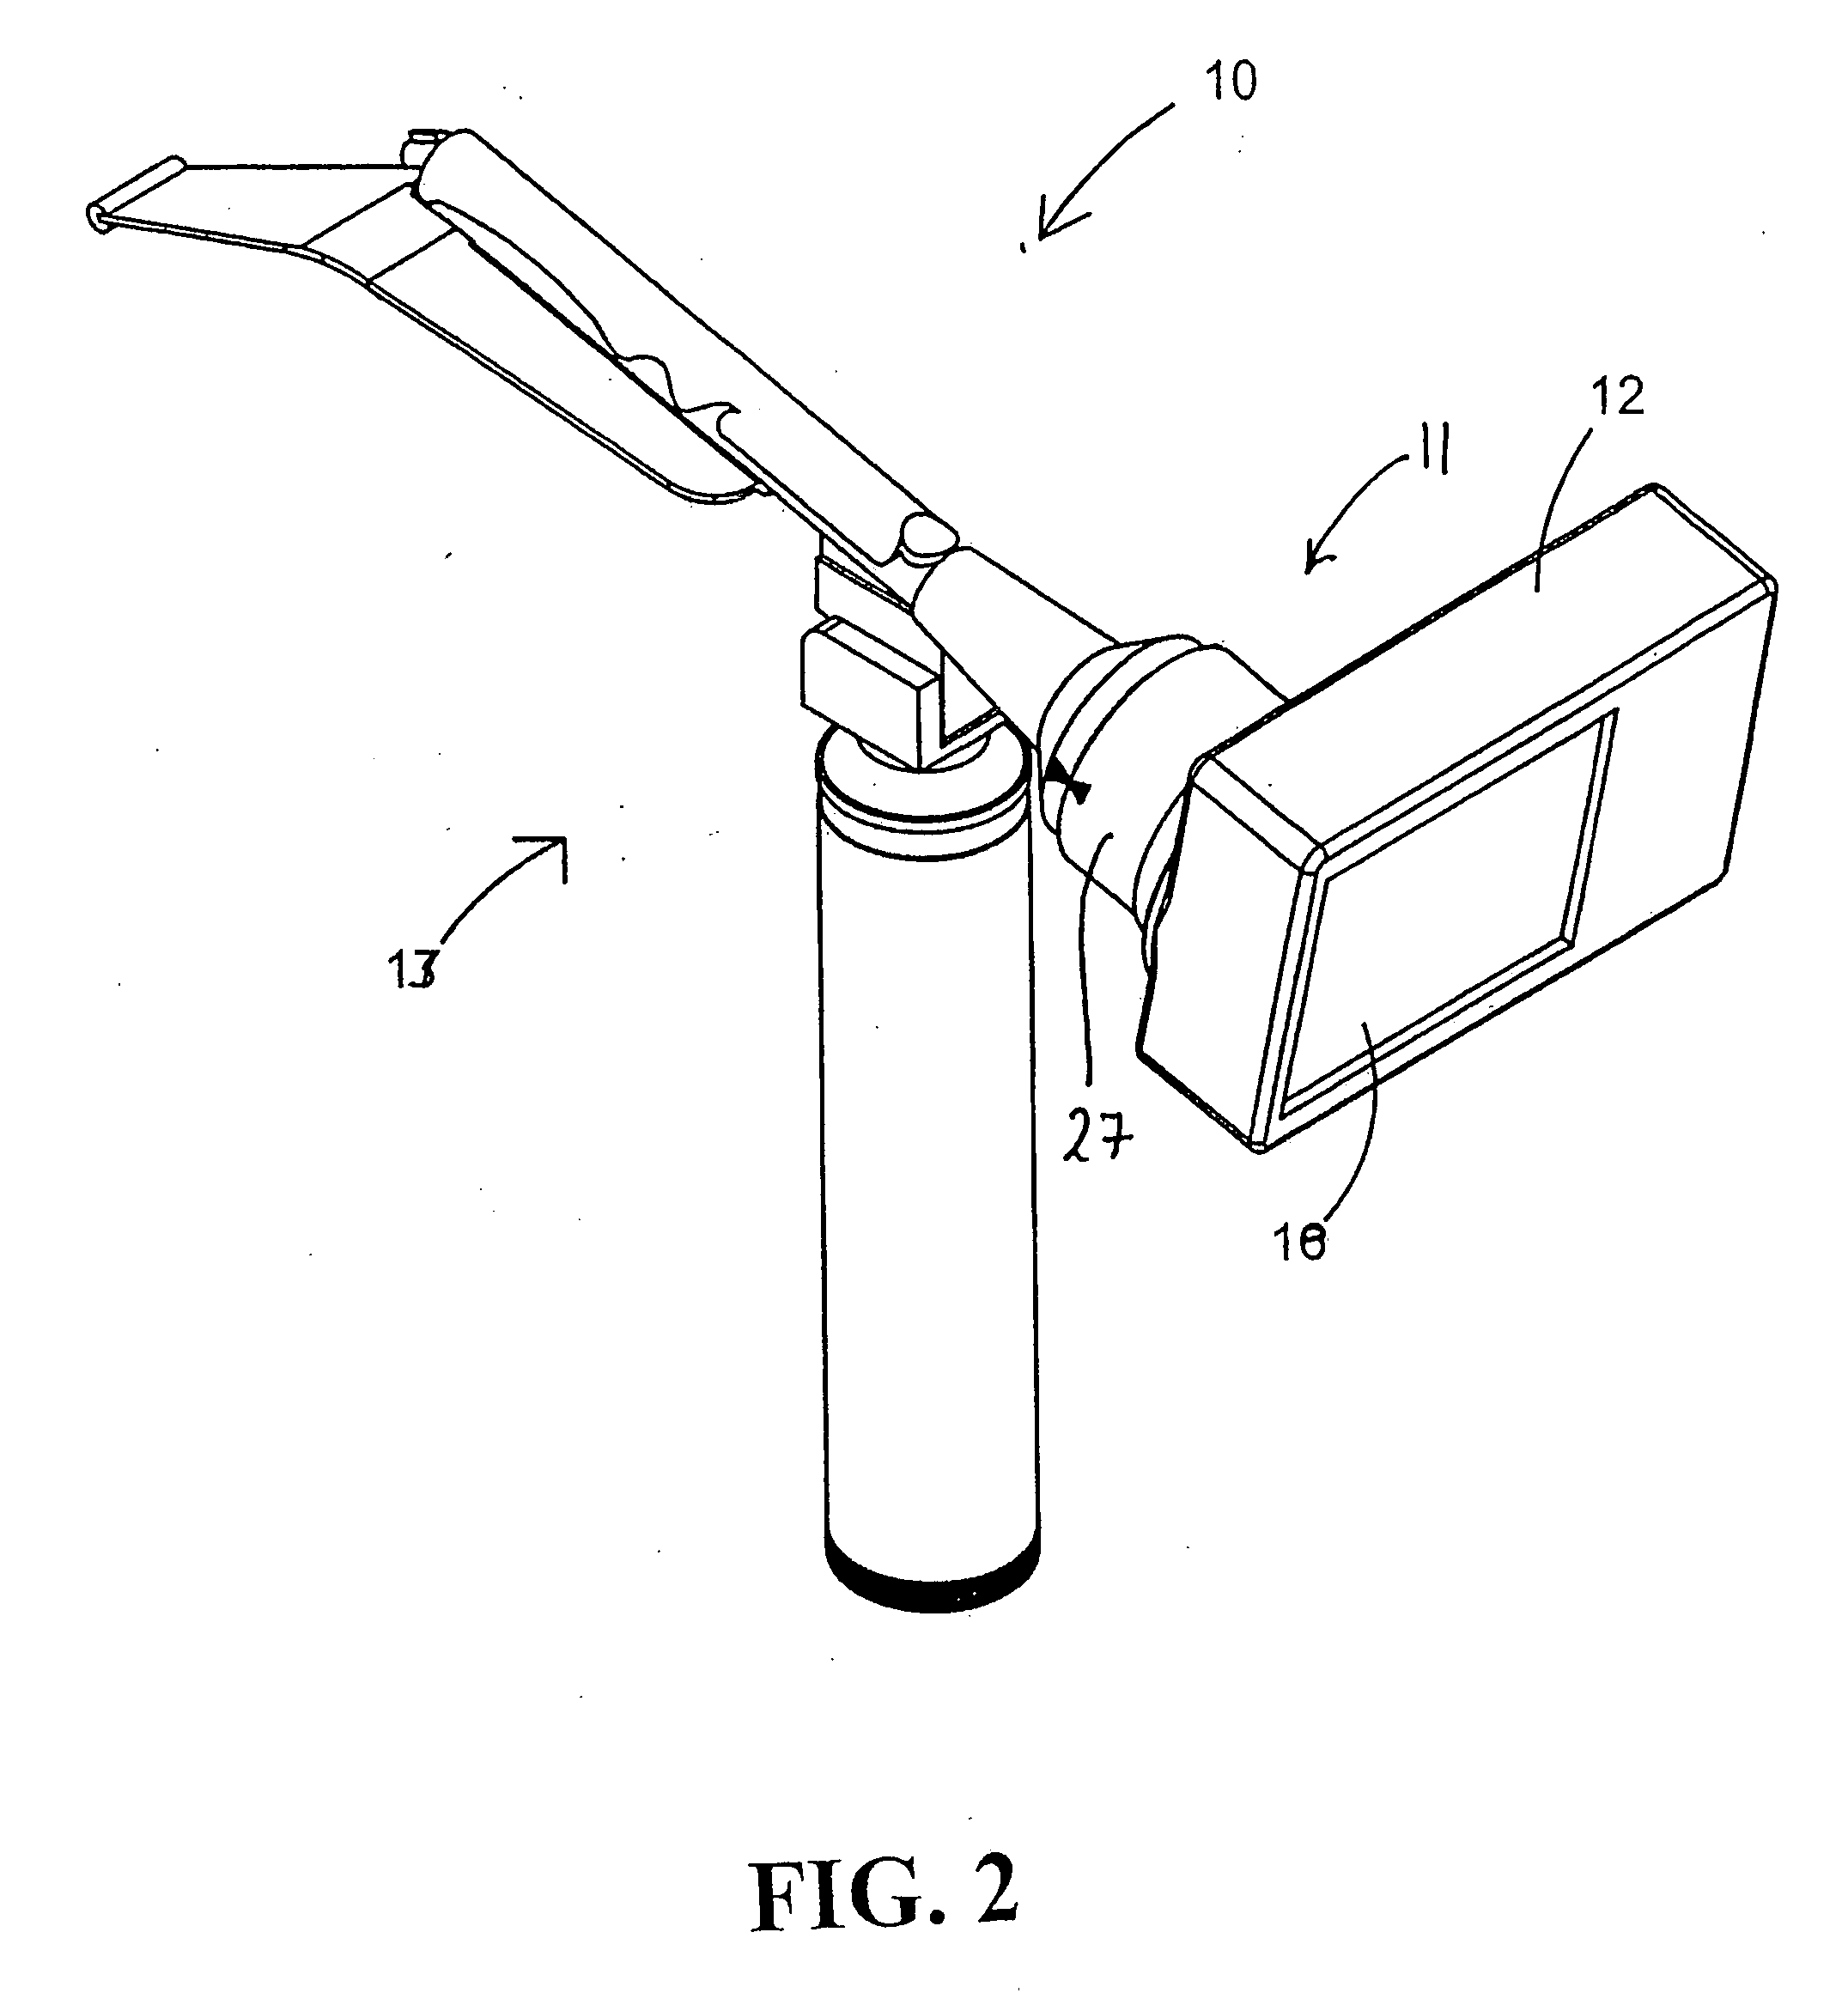 Handheld portable medical viewing assembly for displaying medical images during medical procedures and intubation stylet